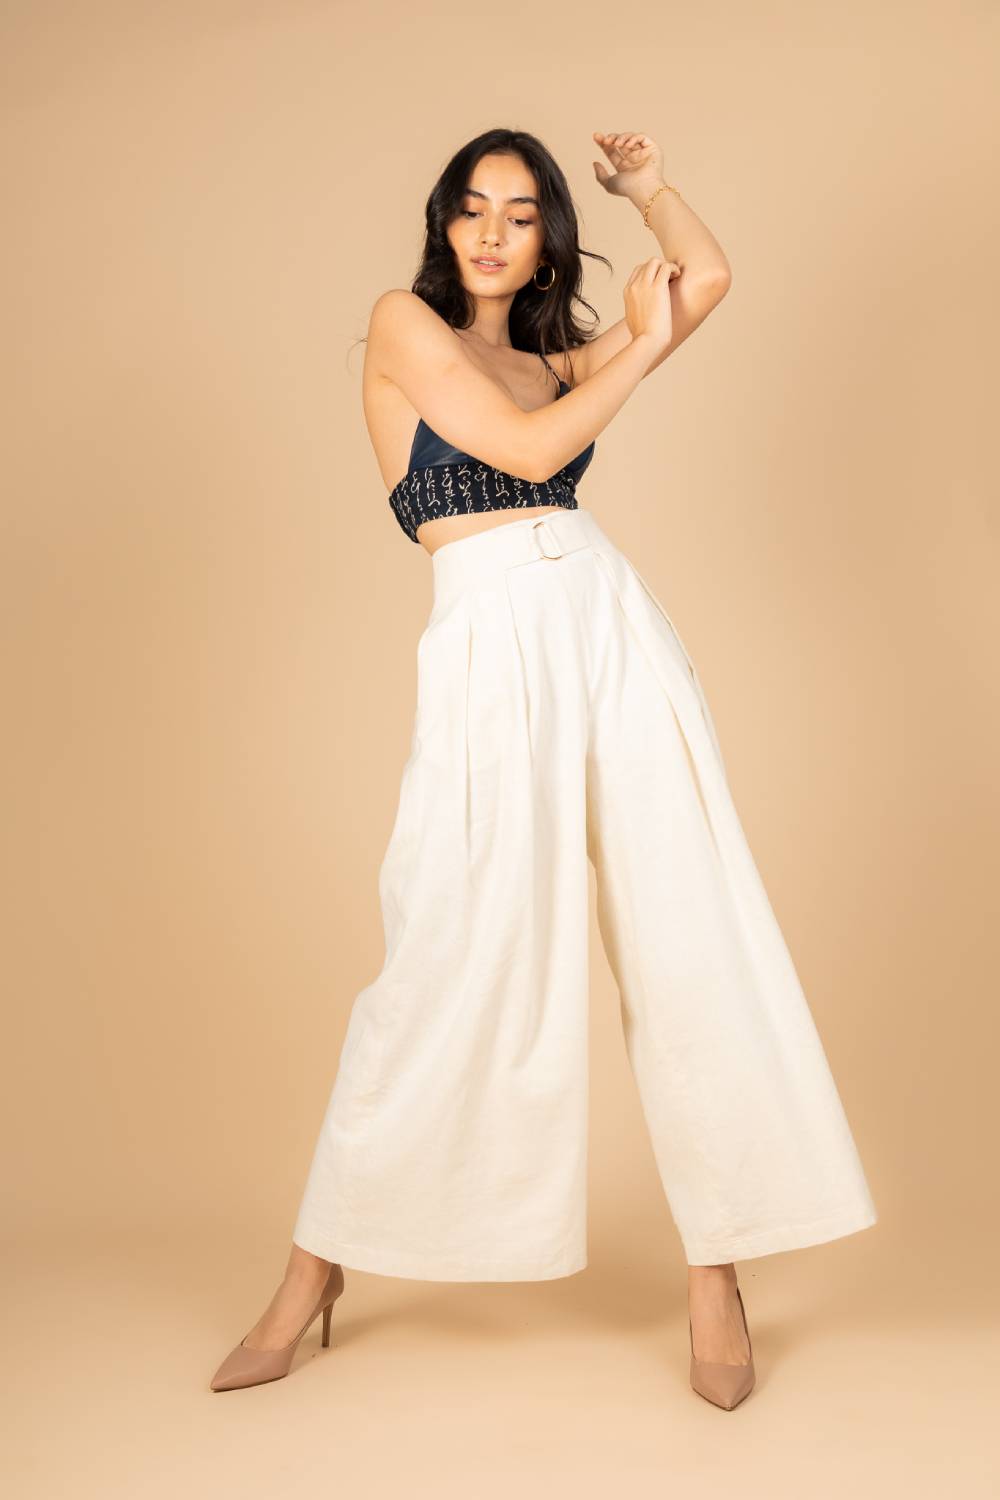 Image for The Hakama, featuring an image of the model wearing HAKAMA 袴 High Waisted Pleated Pants from FLAIR® By Tori. Also known as wide leg pants or Hakama pants.